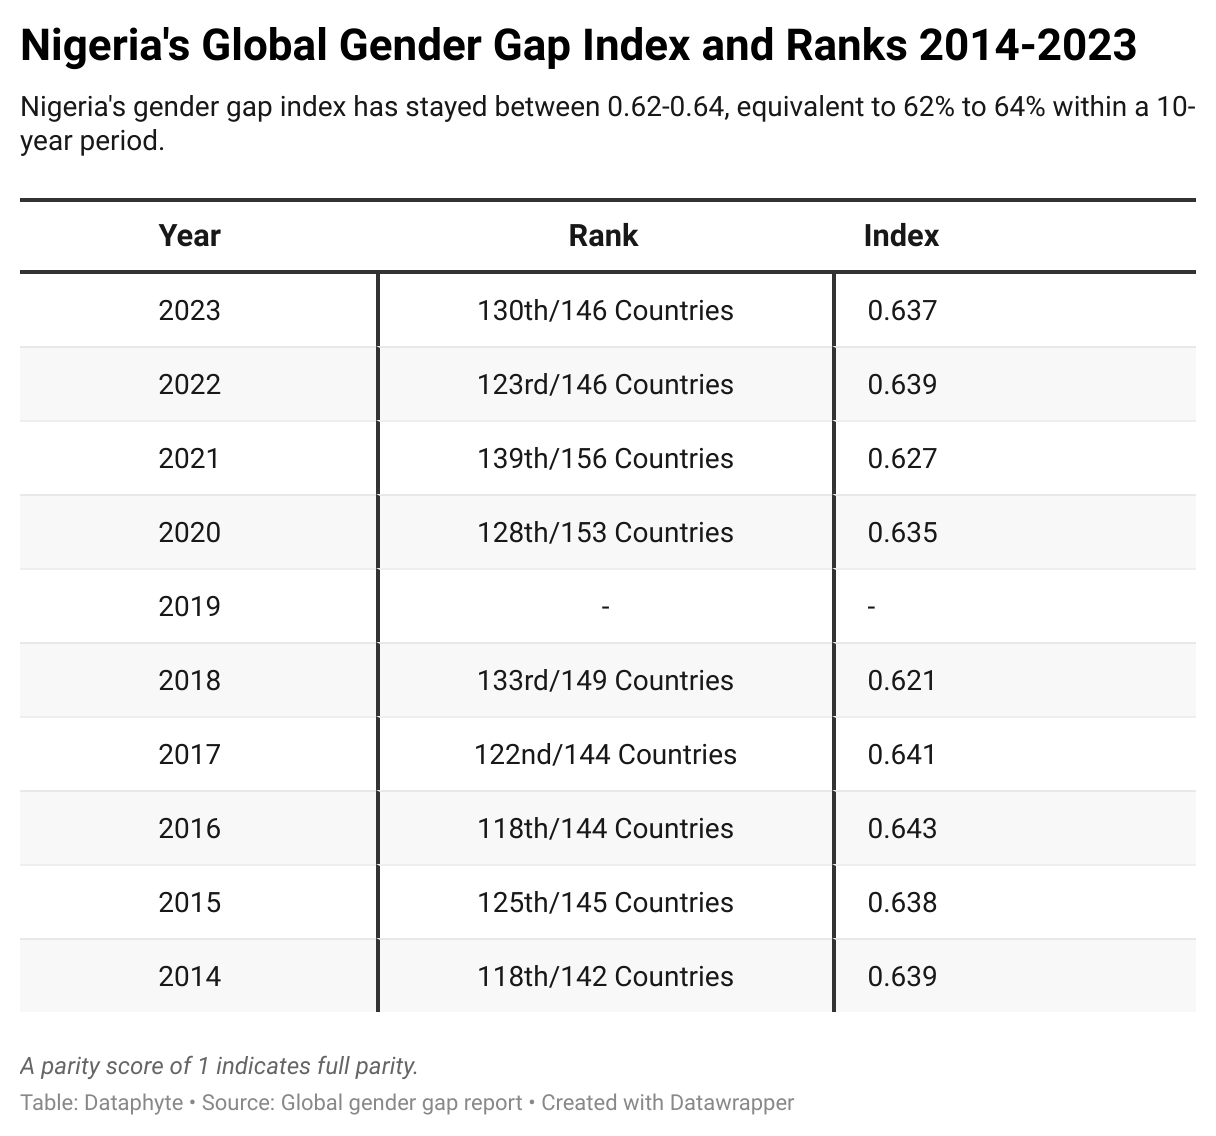 Nigeria’s Gender Parity, worsened by the COVID 19 pandemic